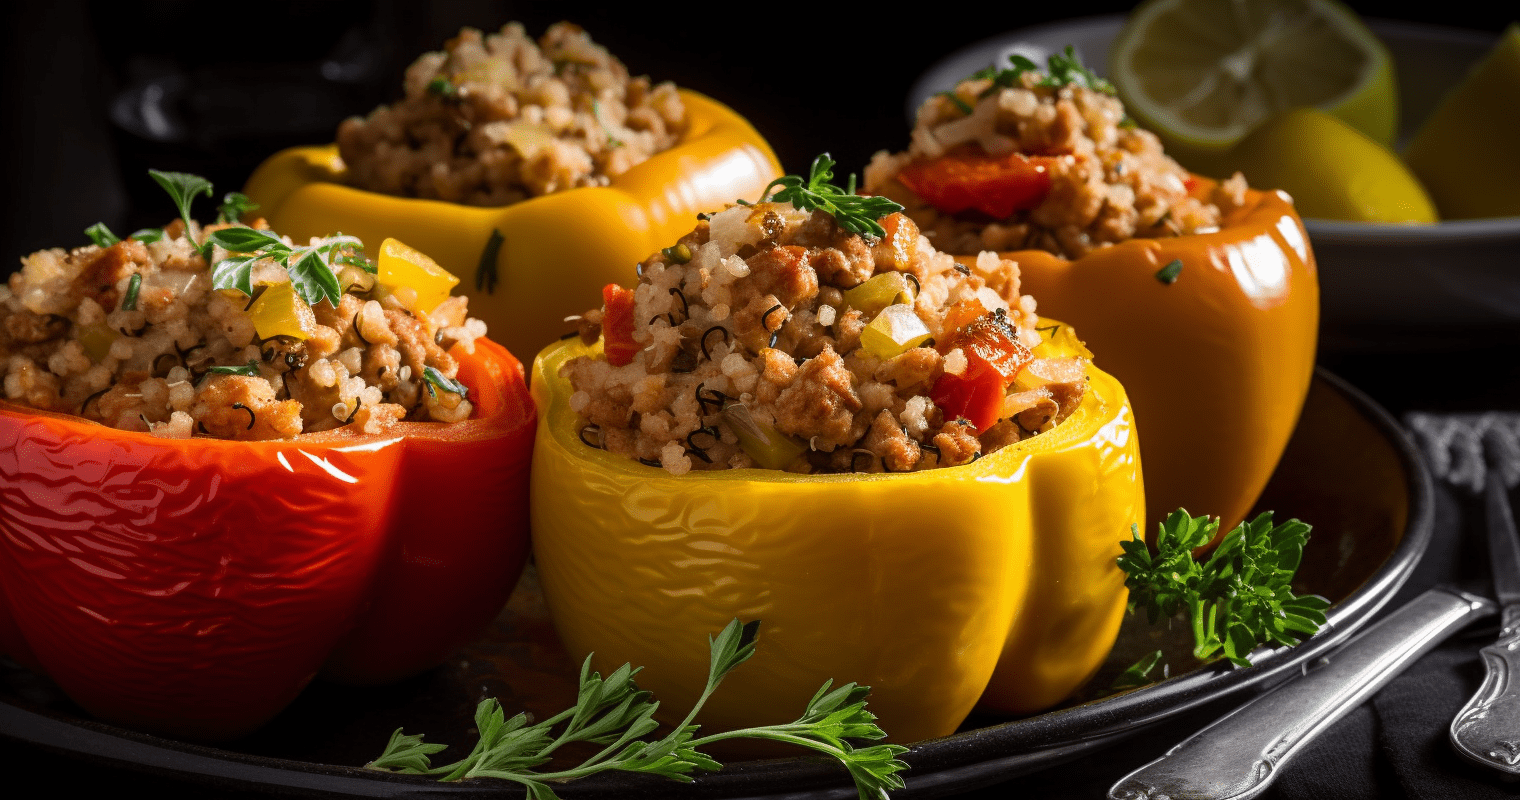 Delicious and Nutritious Stuffed Bell Peppers with Ground Turkey and Quinoa